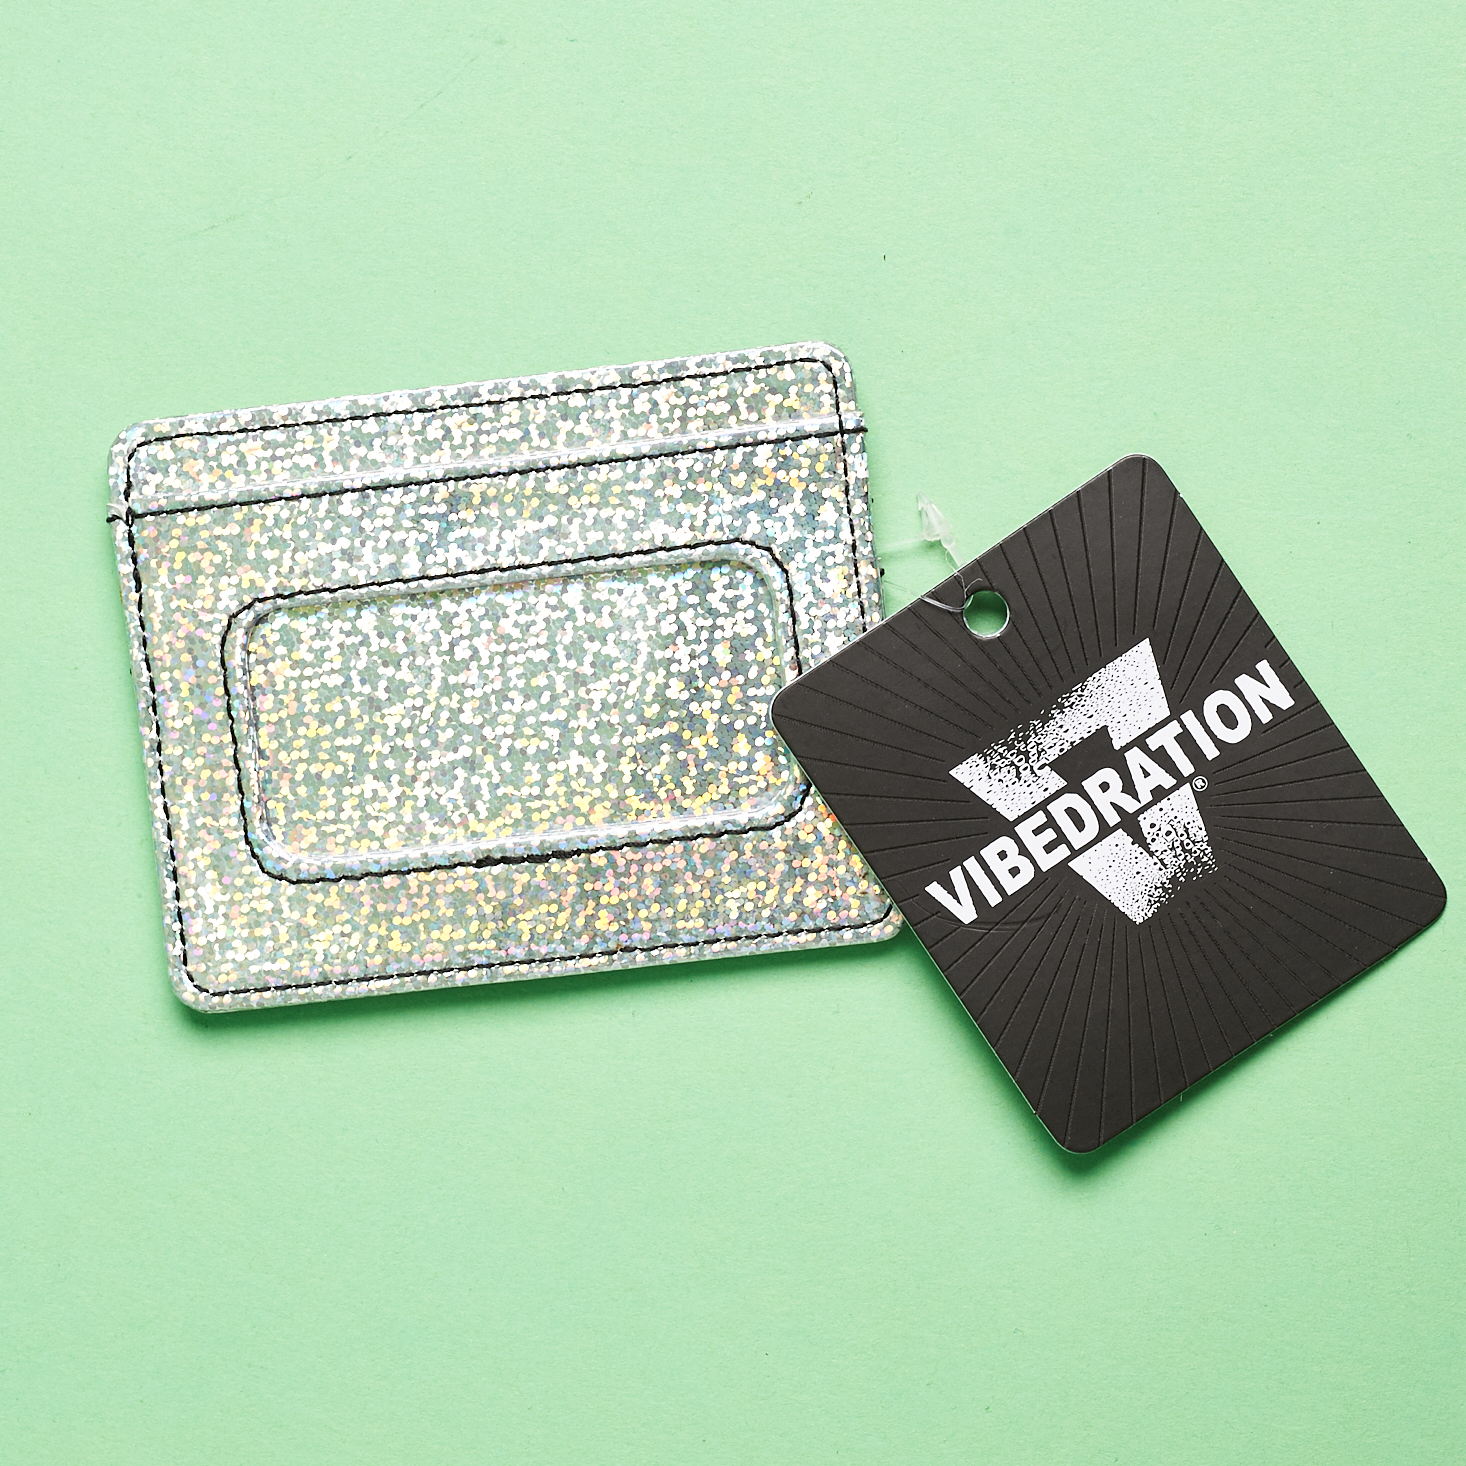 Festival Fashion Box February 2020 - vibedration holo card wallet with brand card